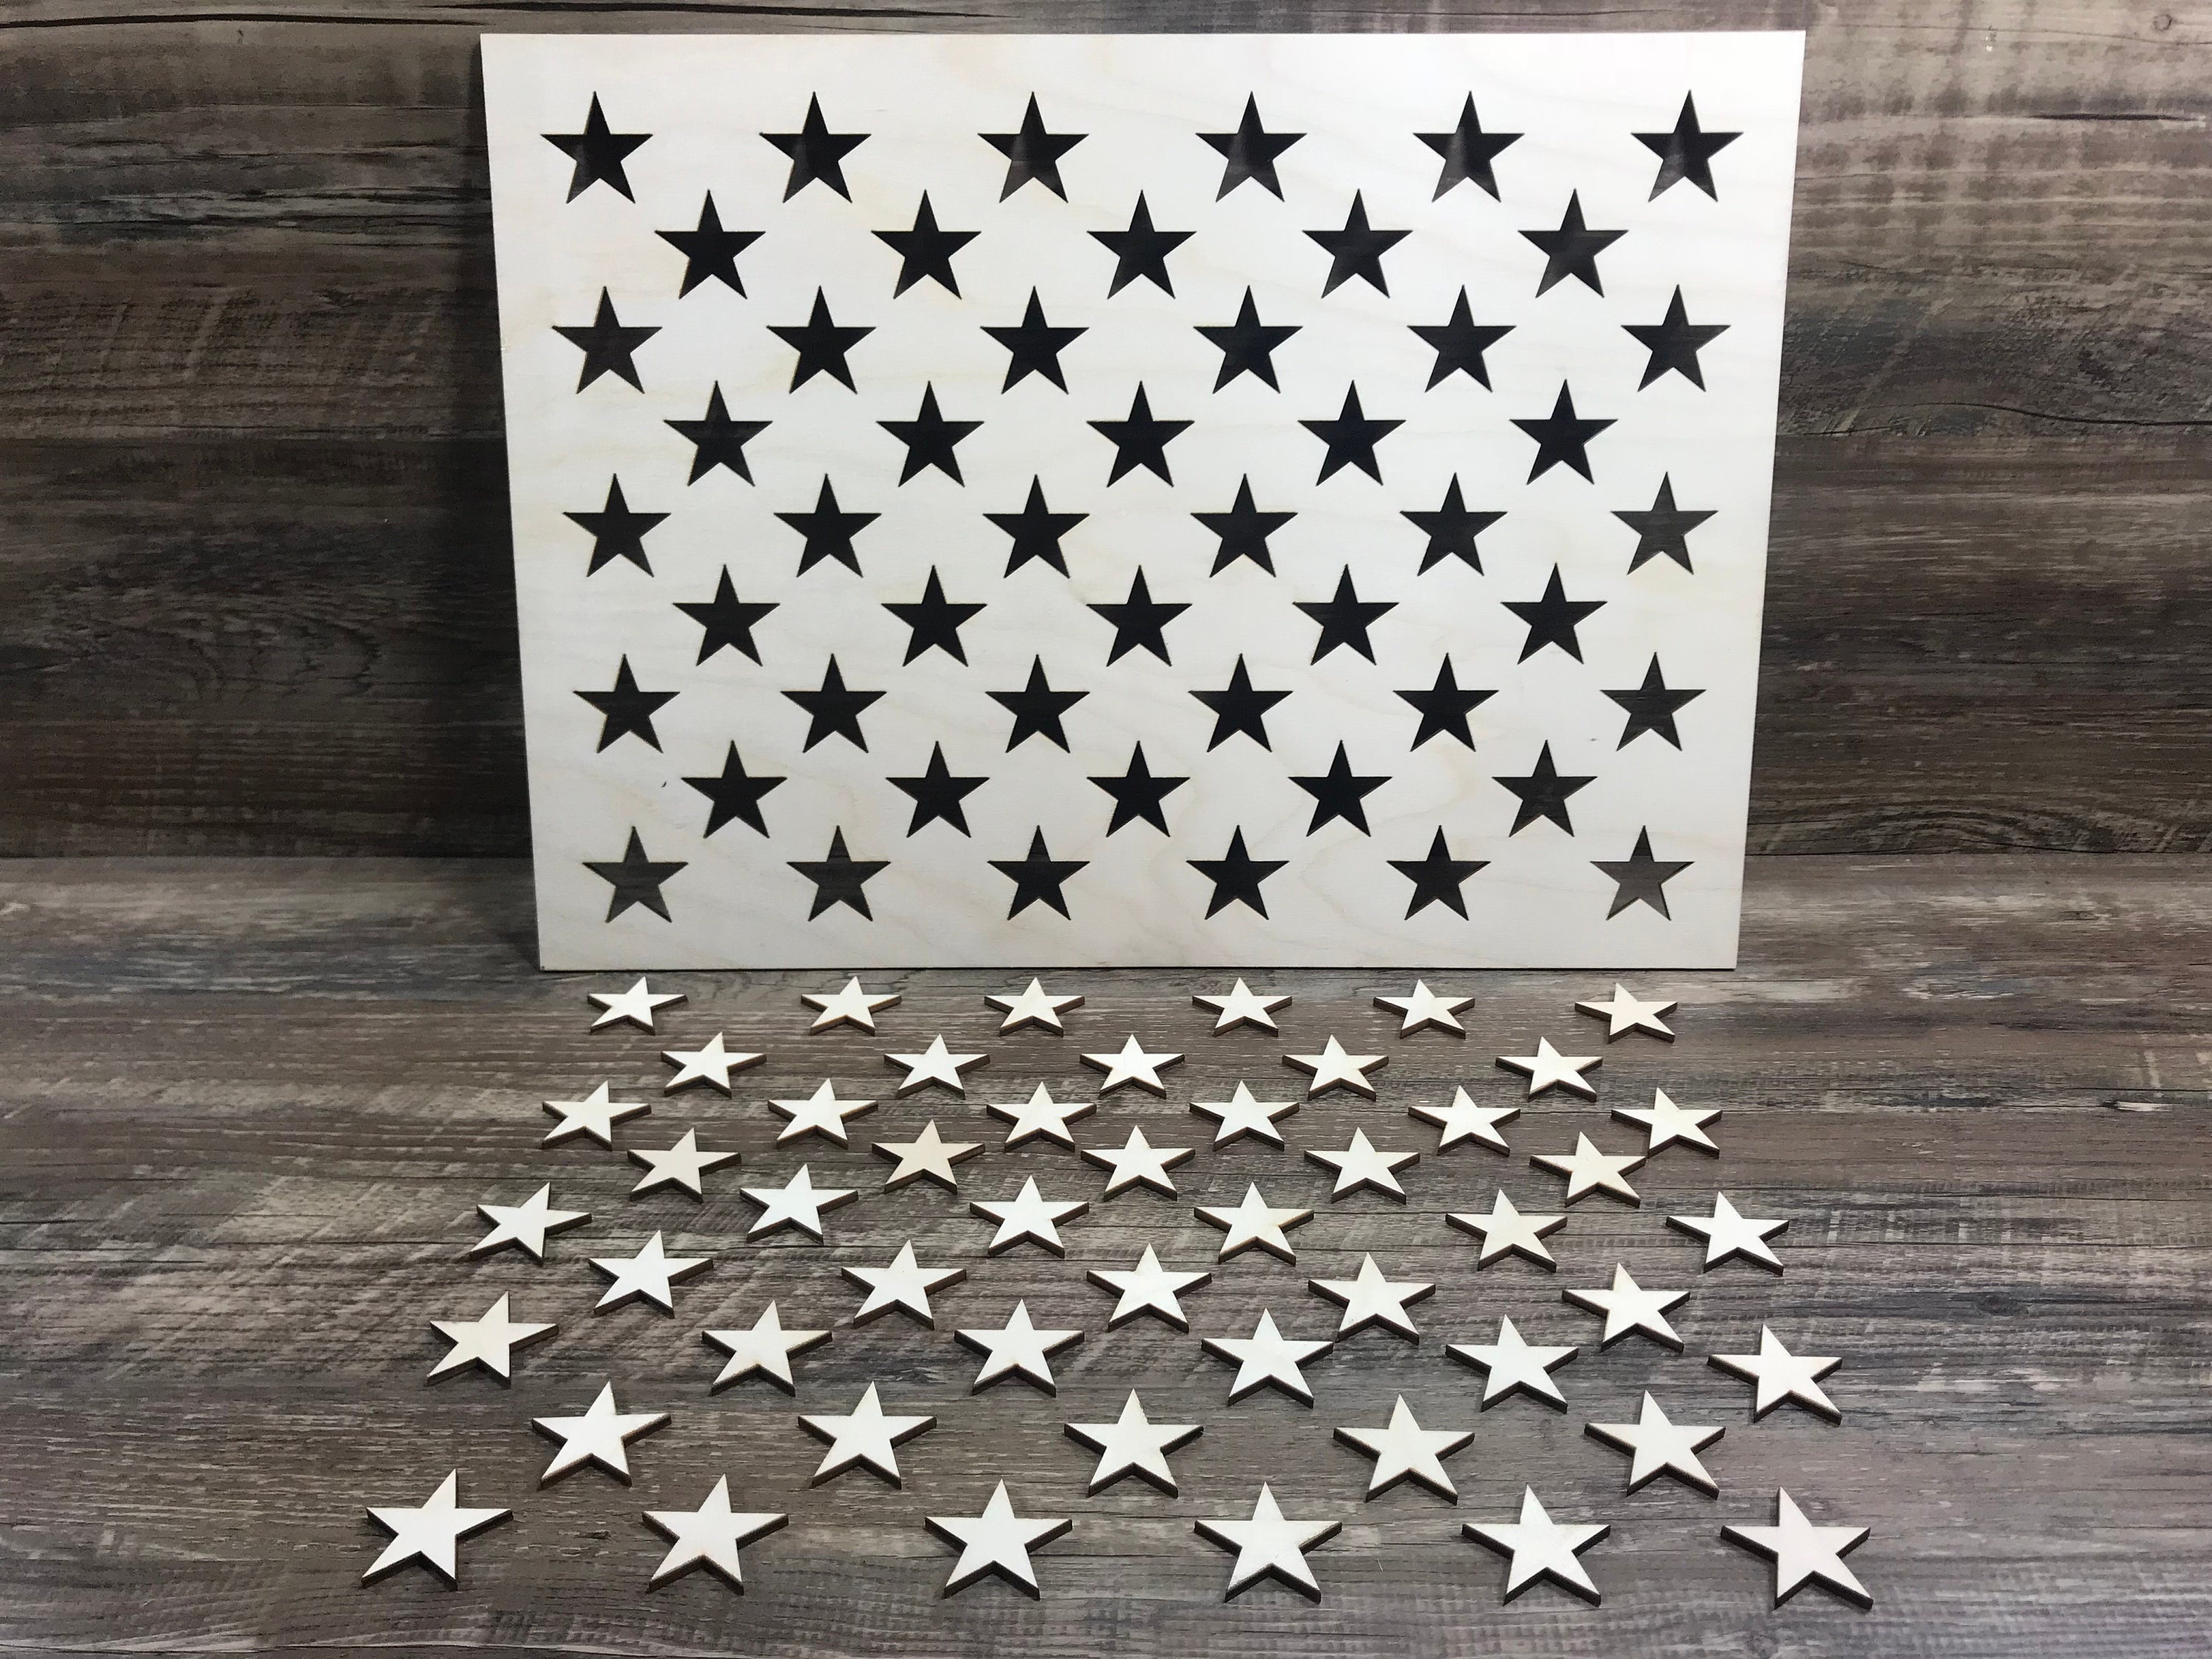 Large Metal Star Stencil for 5 Foot Wide Wood American Flags